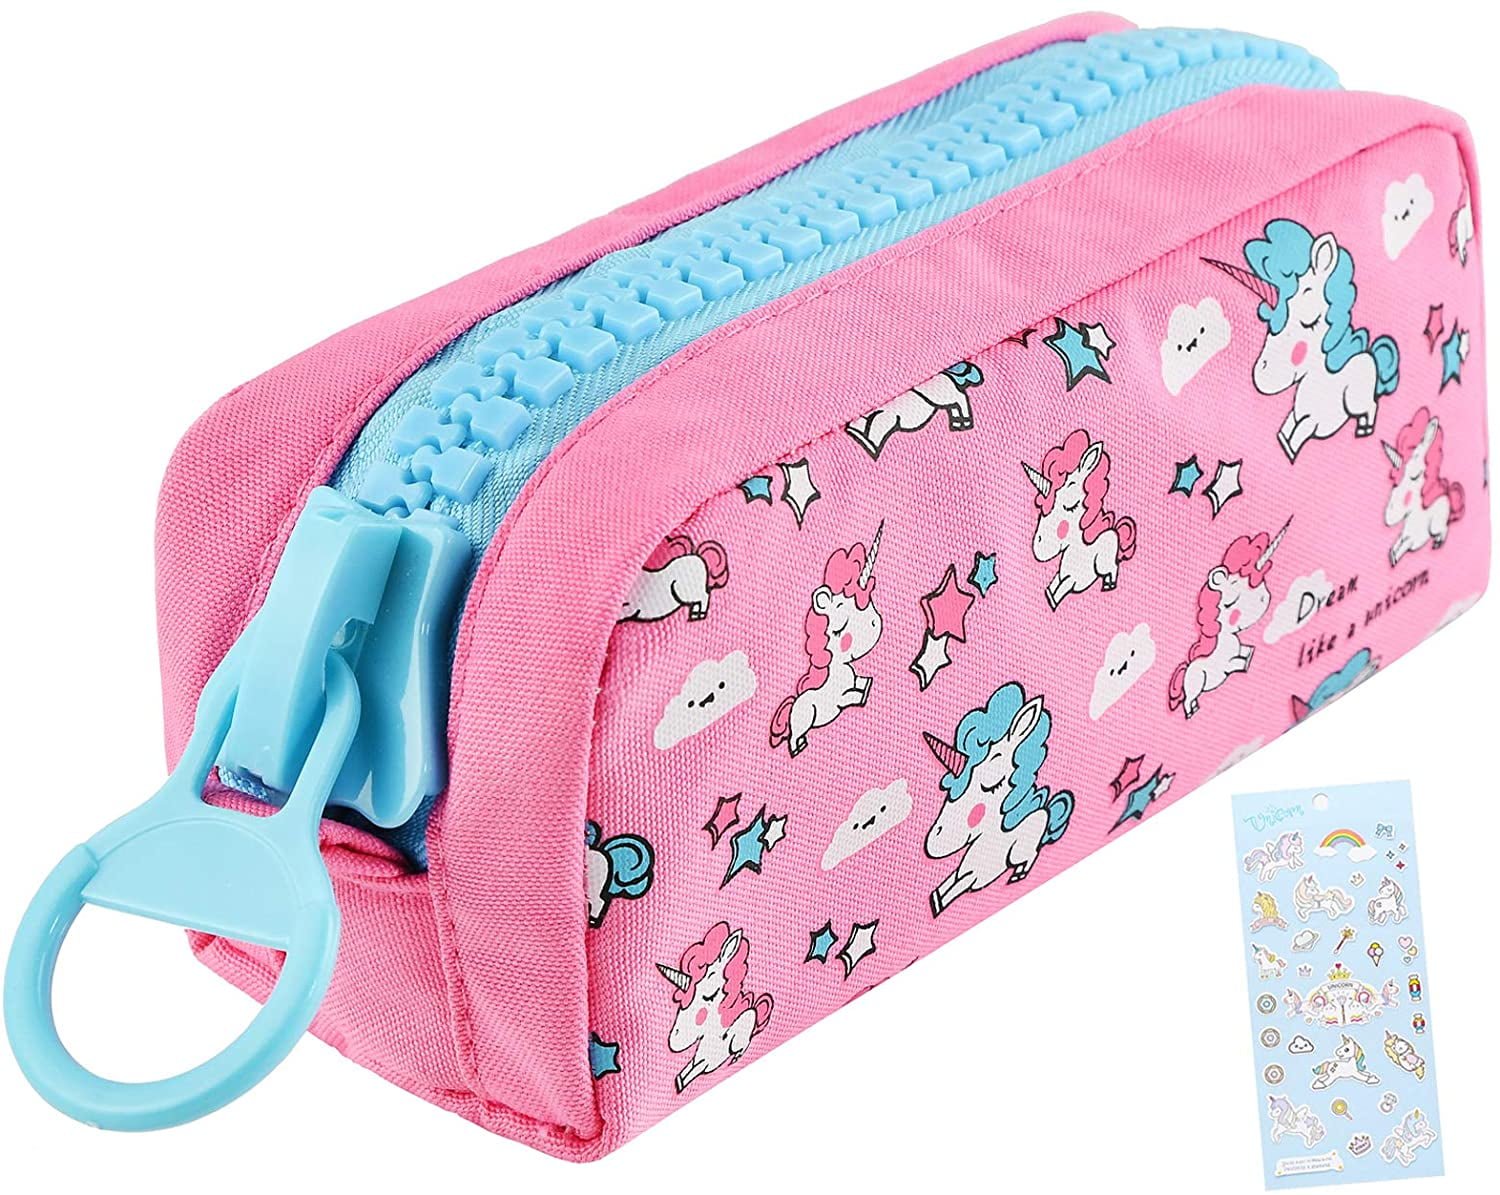  Unineovo Large Pencil Case Pouch for Girls, Cute Kids